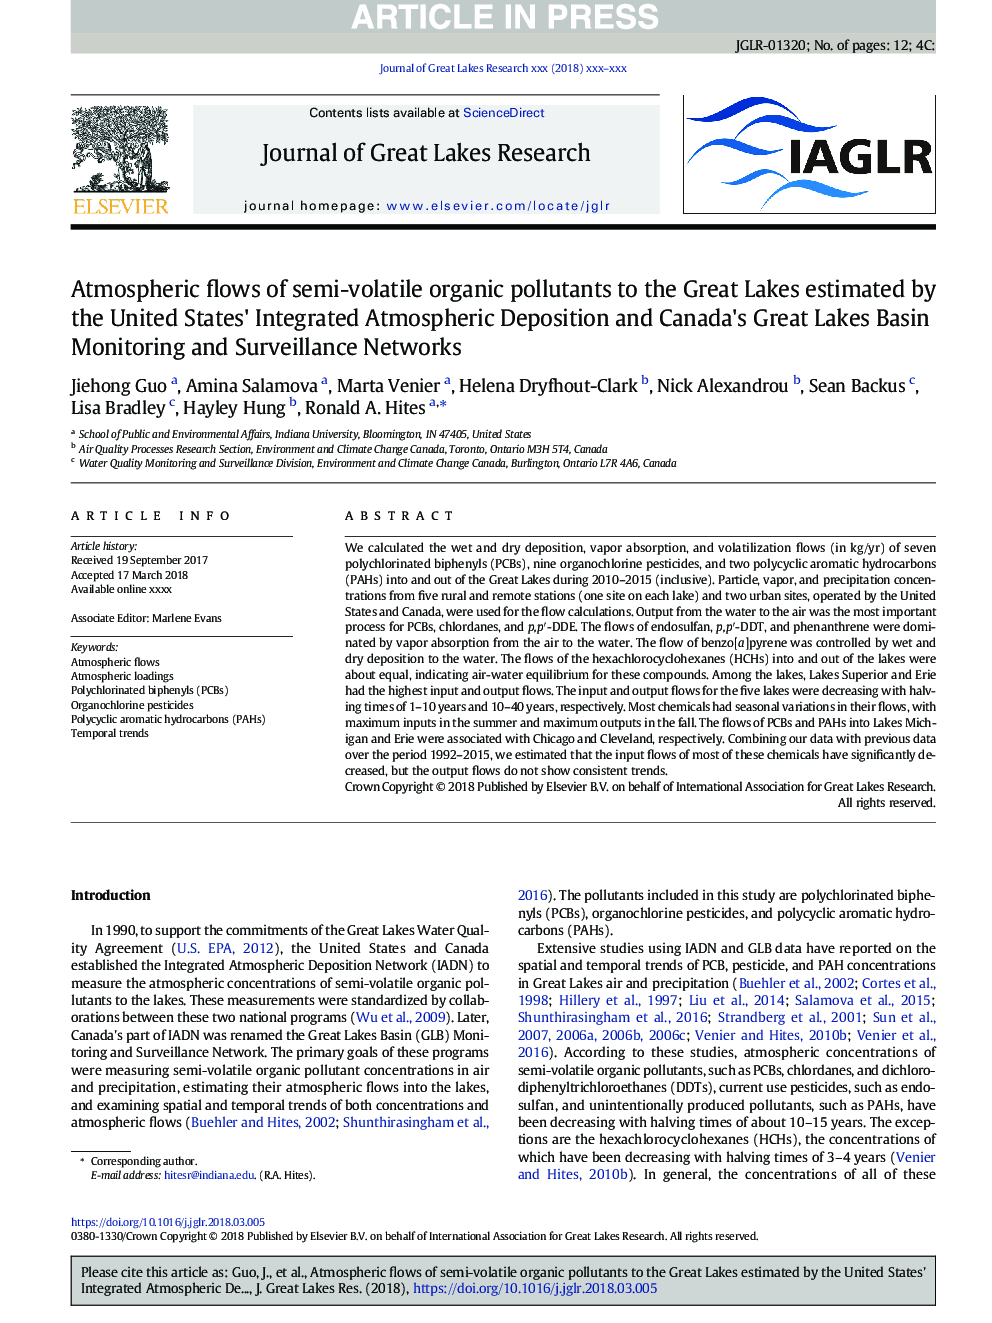 Atmospheric flows of semi-volatile organic pollutants to the Great Lakes estimated by the United States' Integrated Atmospheric Deposition and Canada's Great Lakes Basin Monitoring and Surveillance Networks